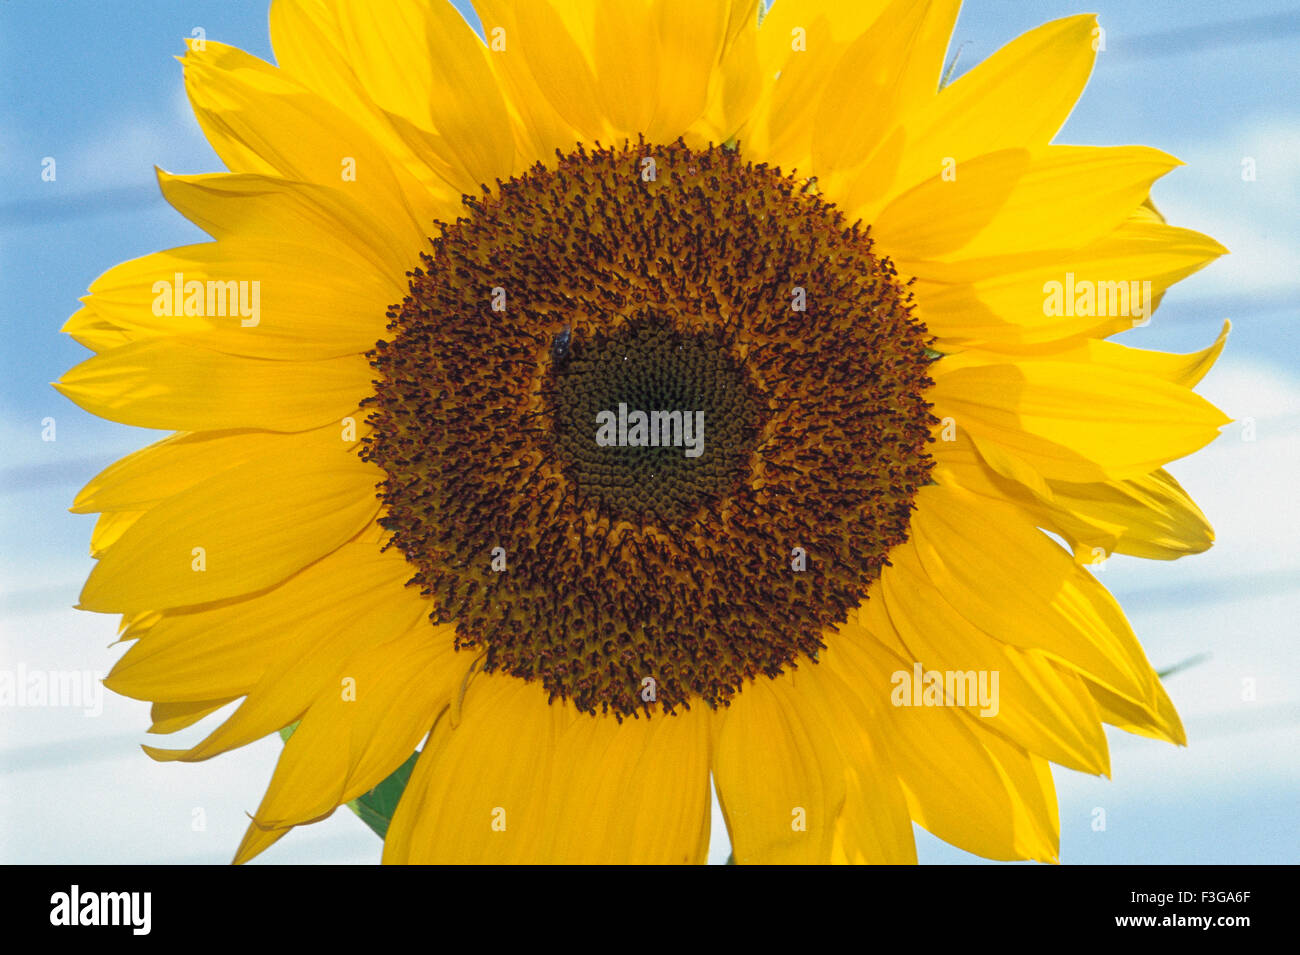 Close ups of Sunflower showing stamen and petals ; Mauritius Stock Photo